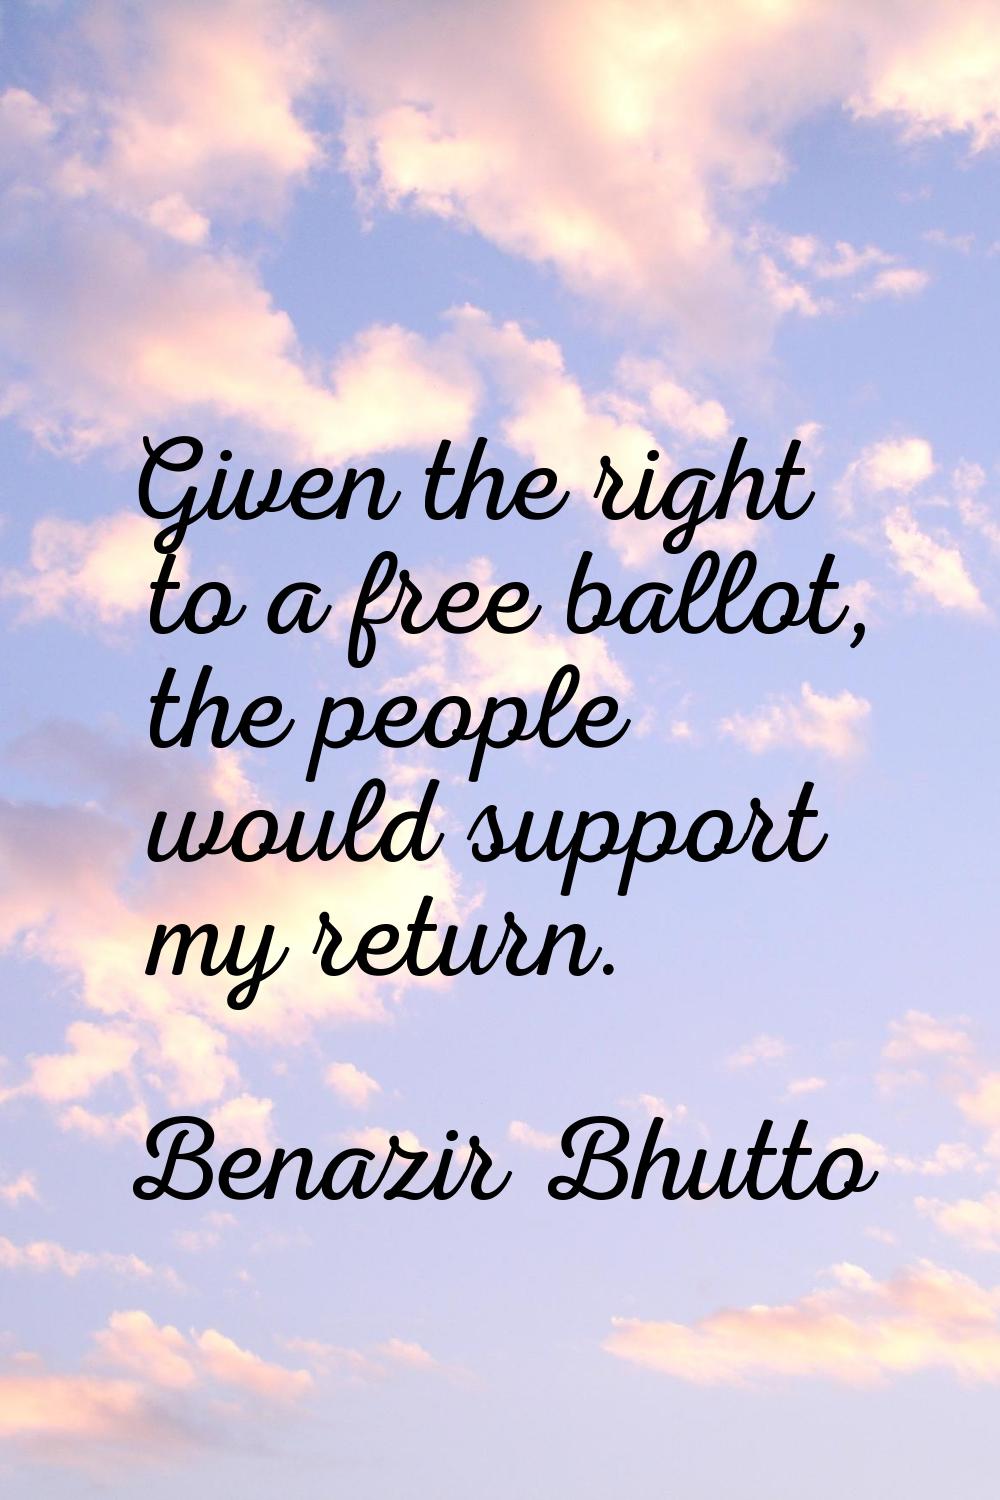 Given the right to a free ballot, the people would support my return.